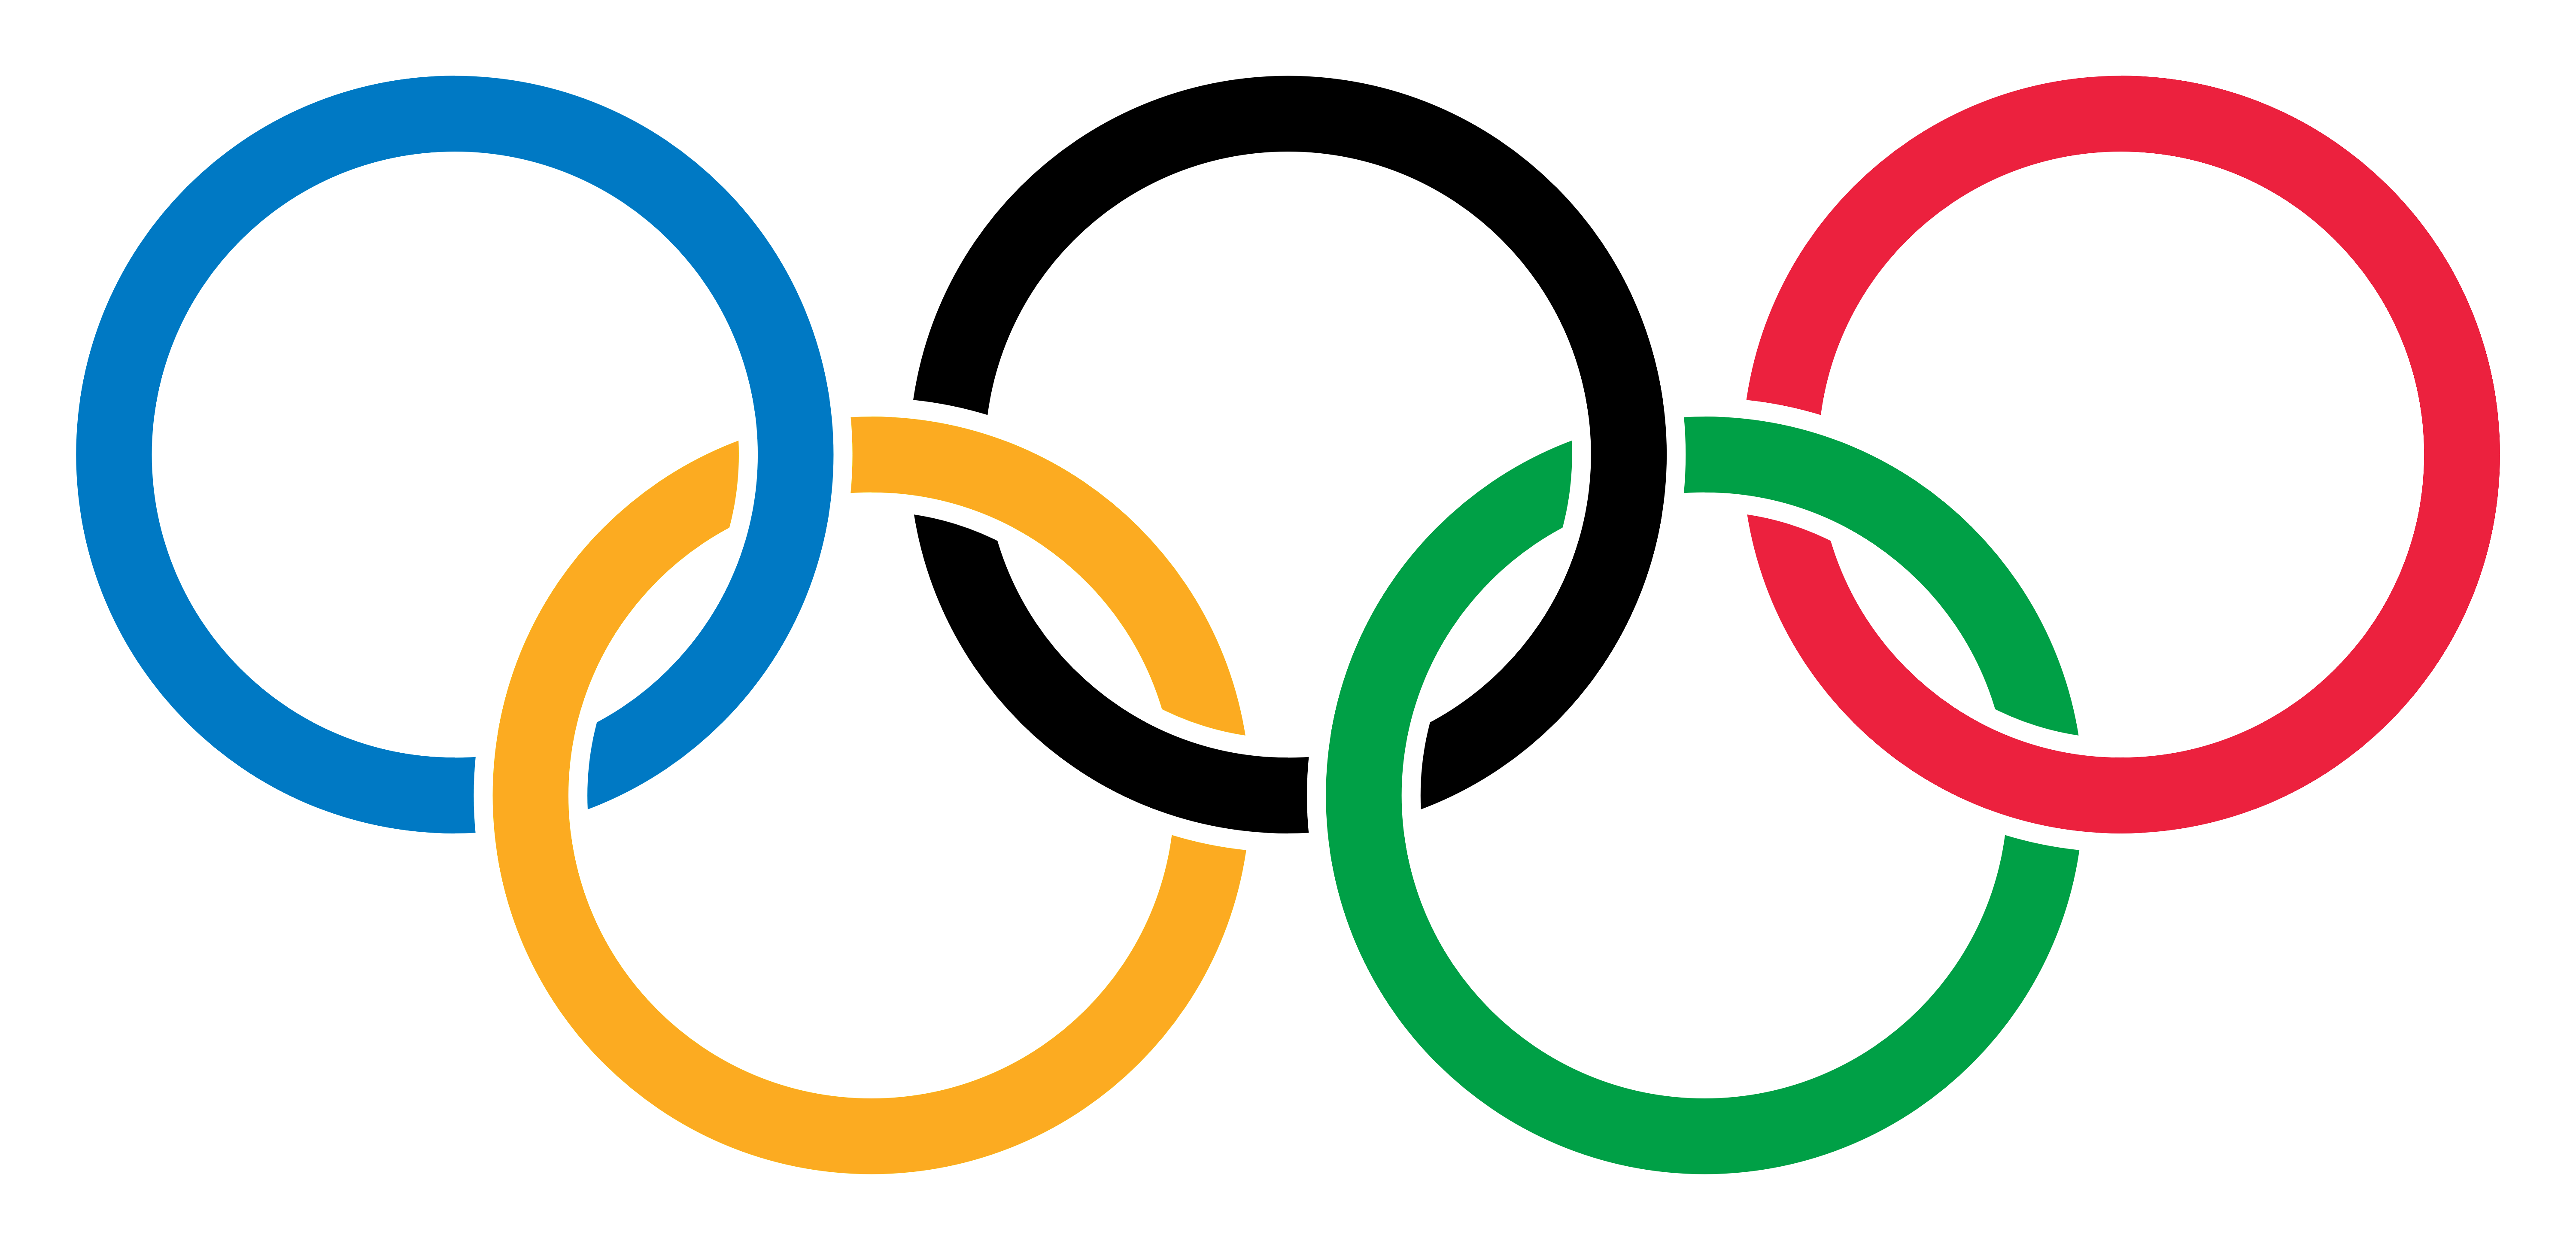 Olympic Rings Logo With Rims 